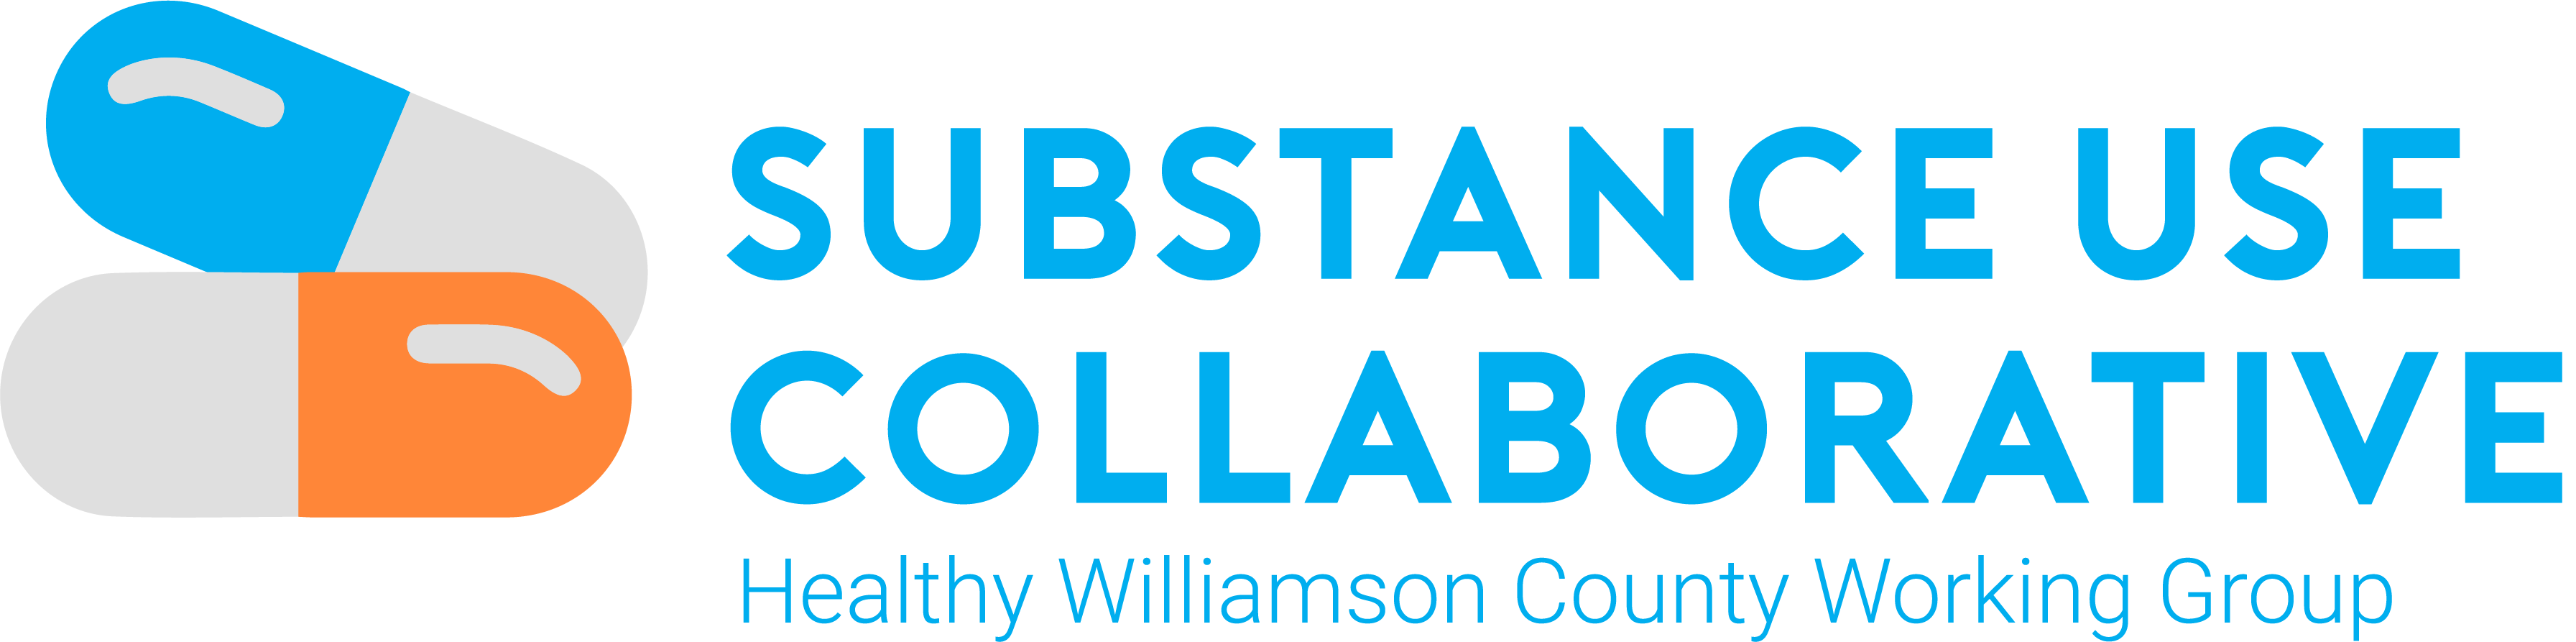 substance use collaborative: healthy williamson county working group